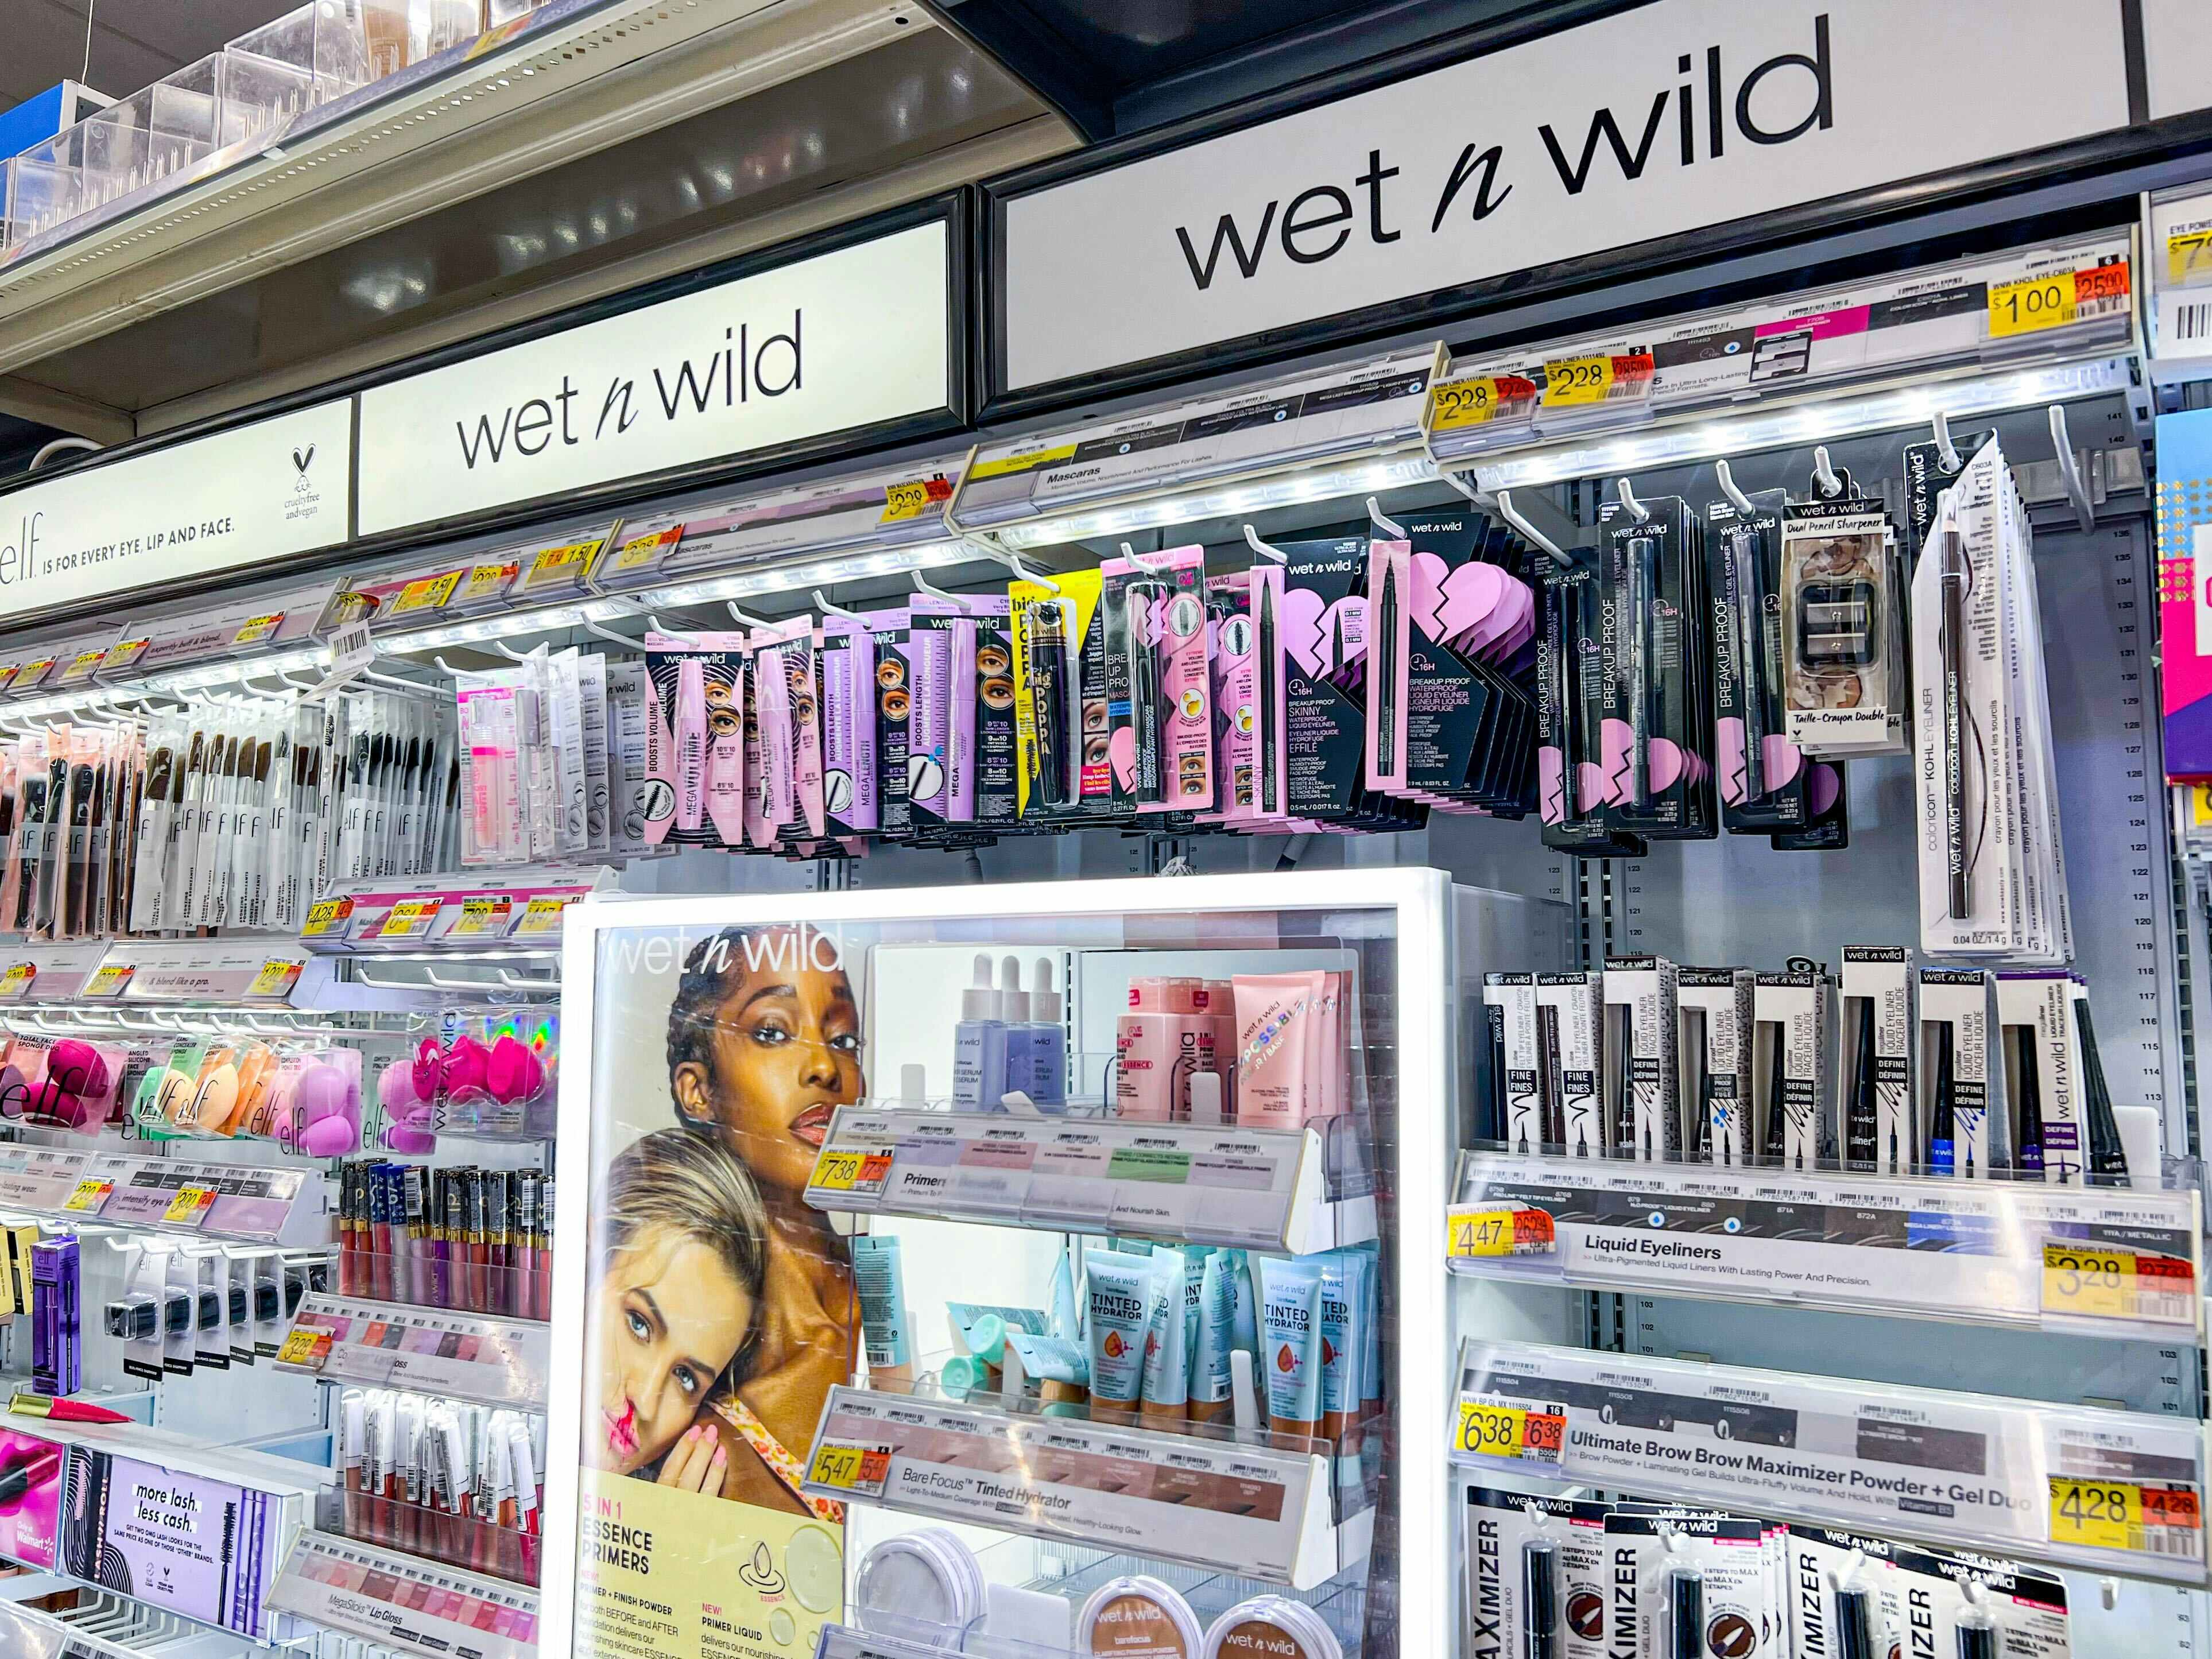 Wet n Wild Beauty Items, Starting at Just $0.86 Online at Walmart